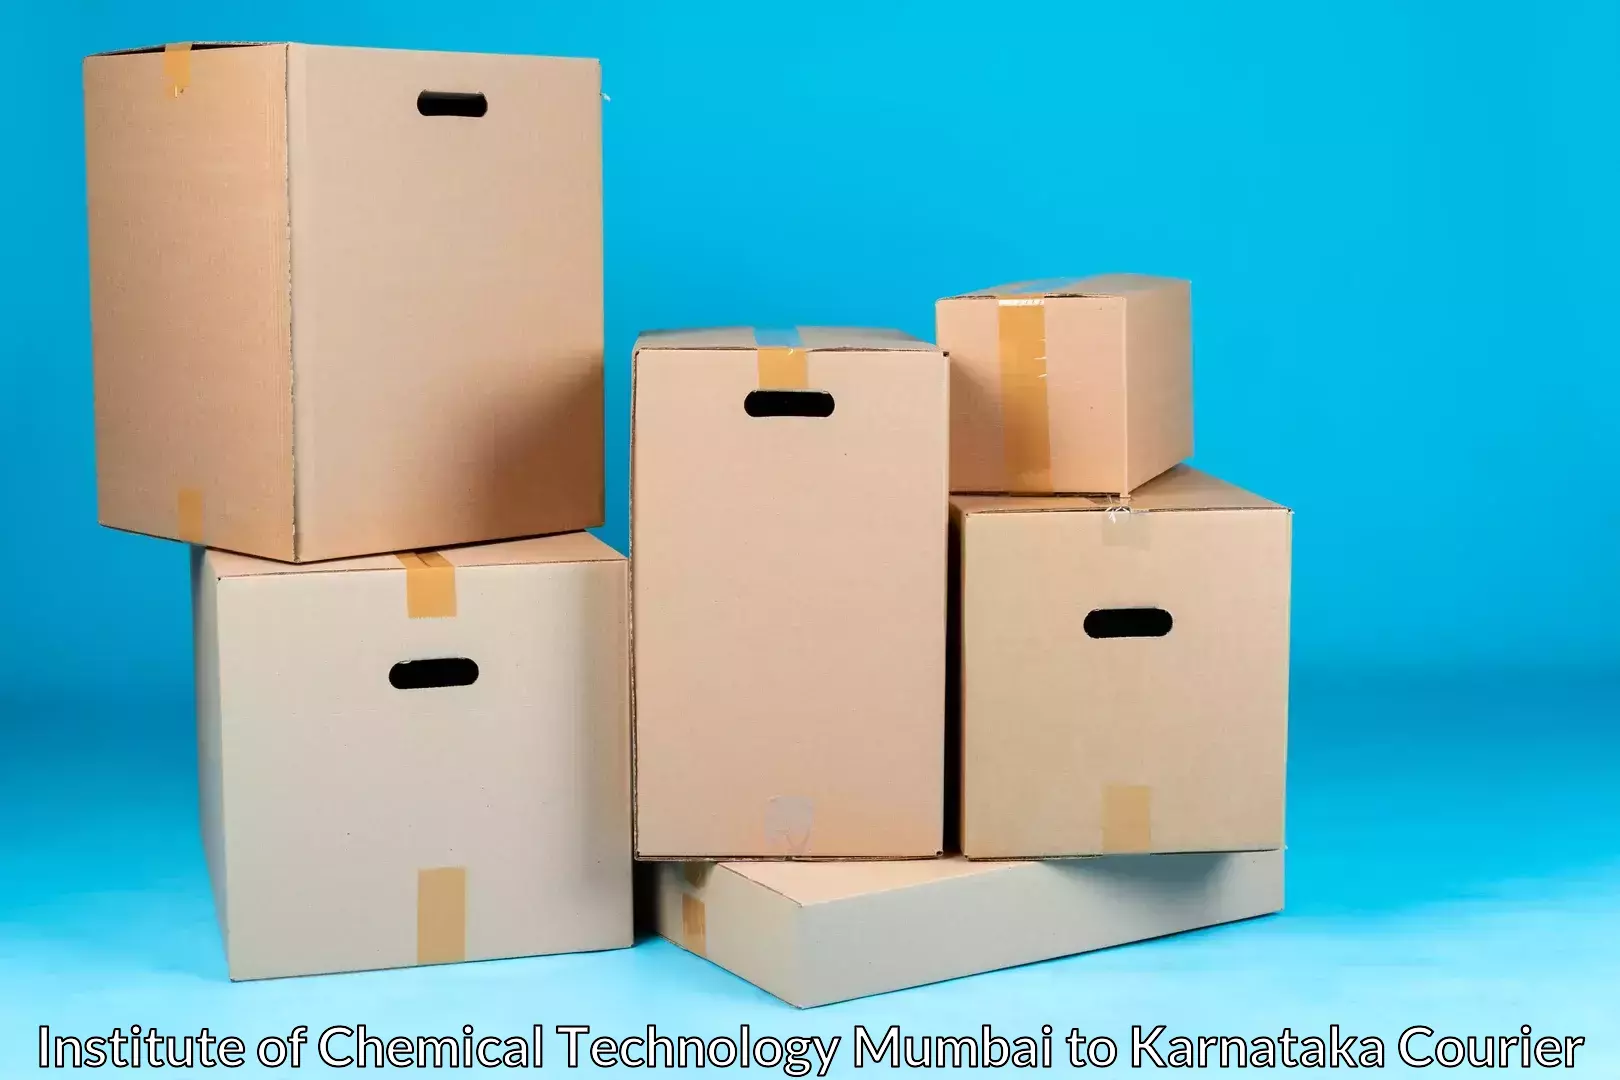 Hassle-free relocation Institute of Chemical Technology Mumbai to Vitla